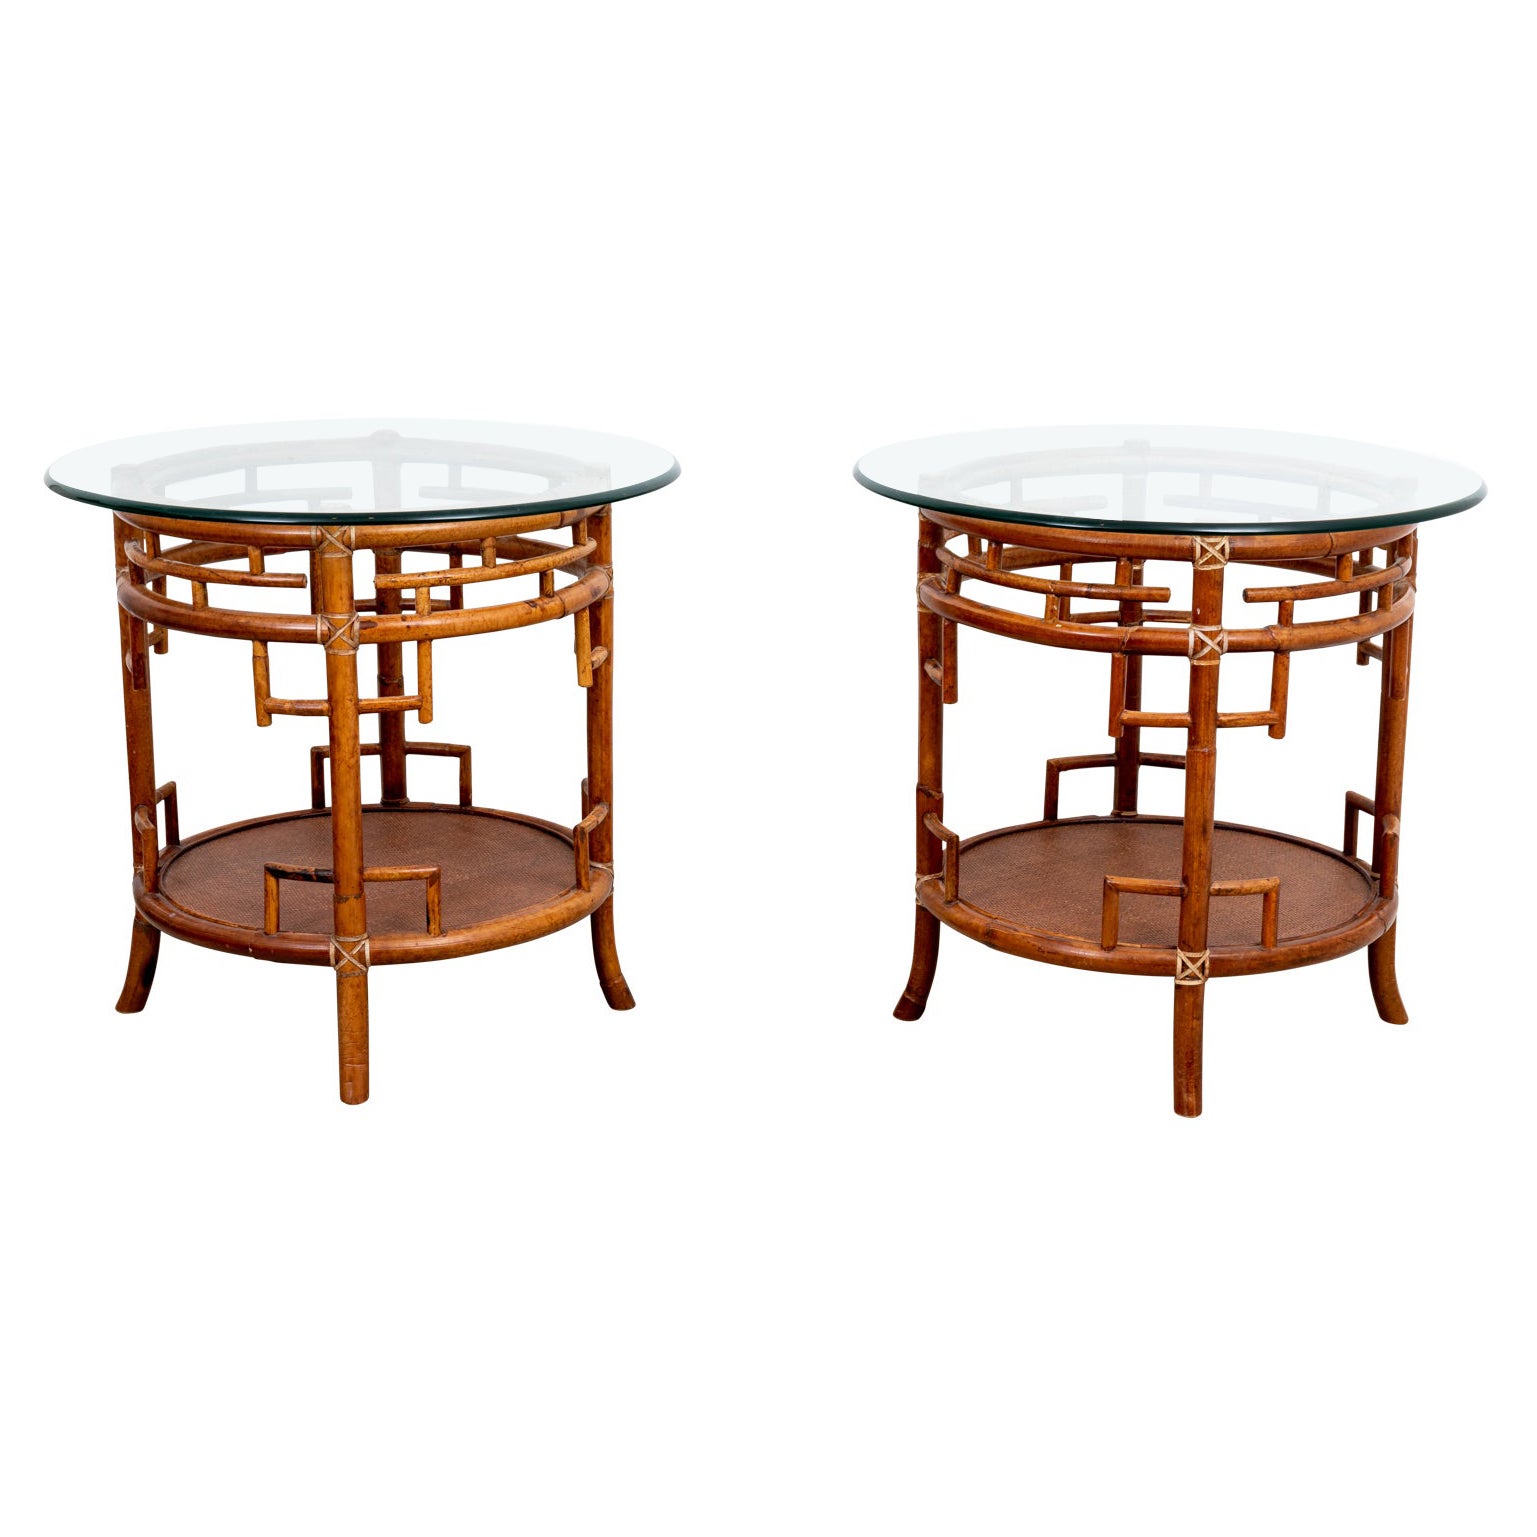 Pair of Rattan Chippendale Style Round Tables with Glass Tops